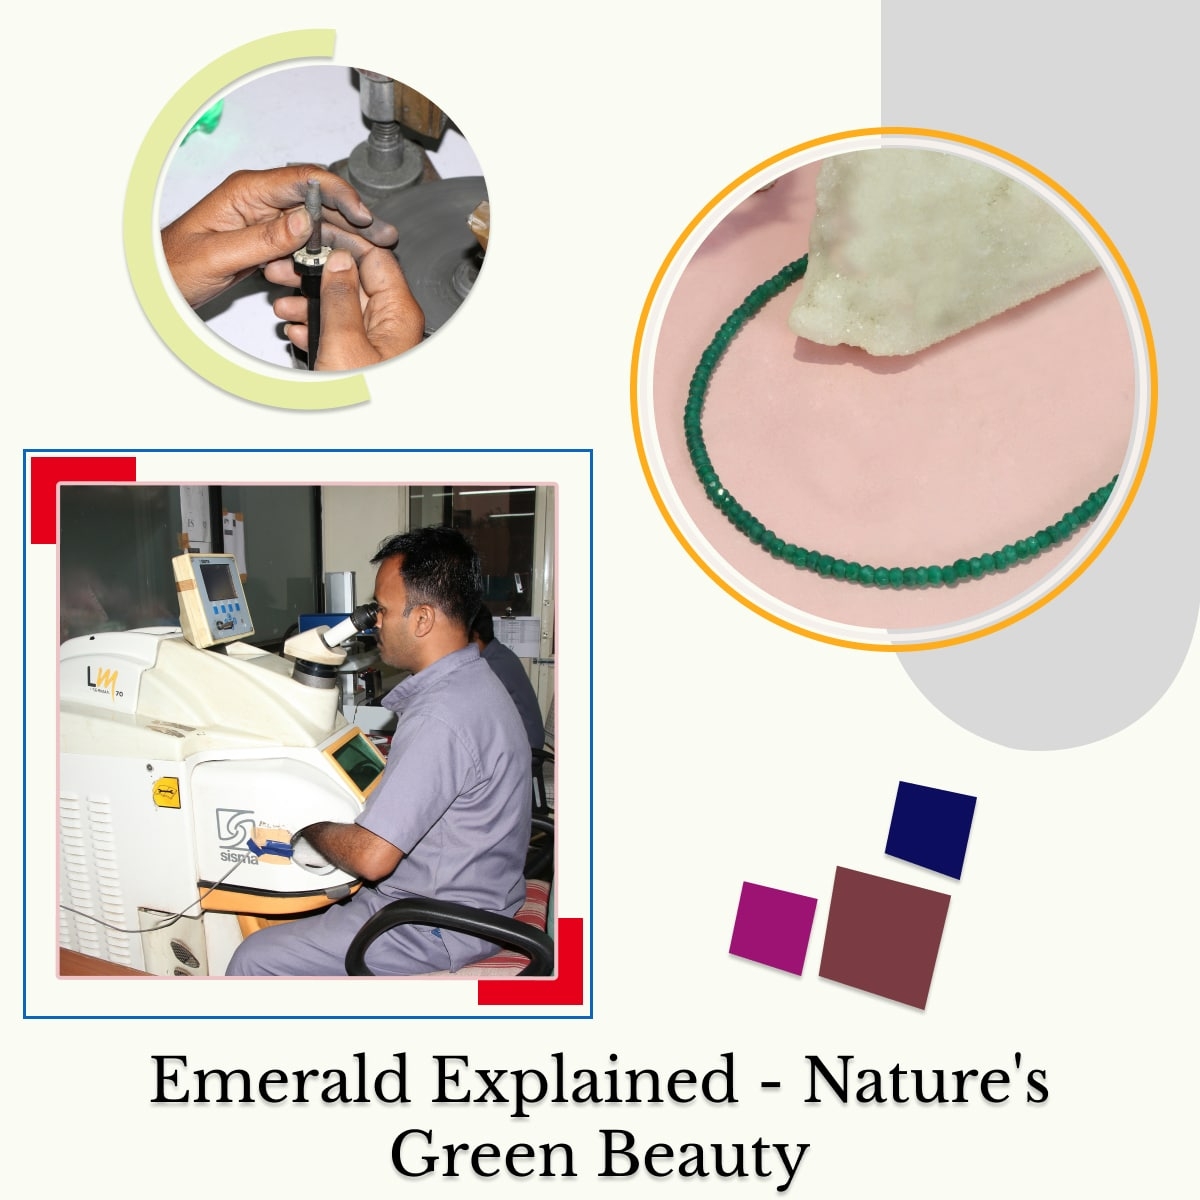 What is Emerald